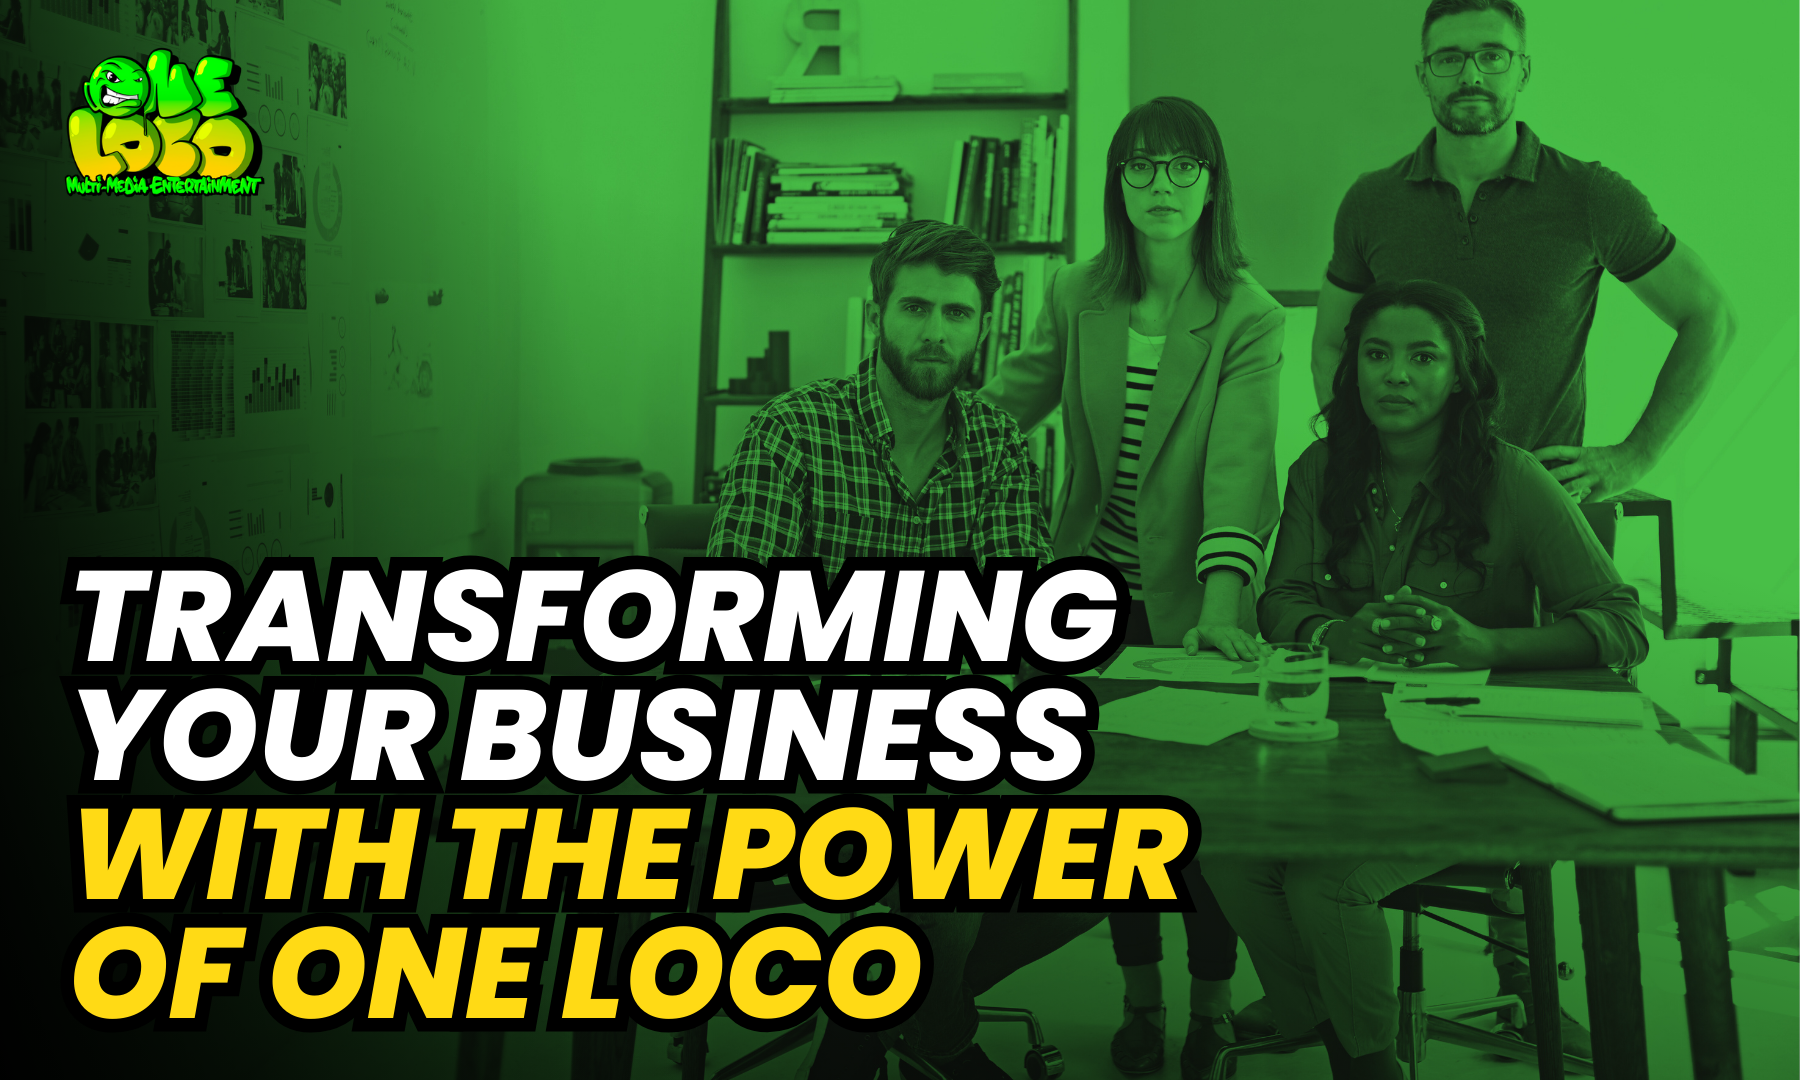 Transforming Your Business with the Power of One Loco